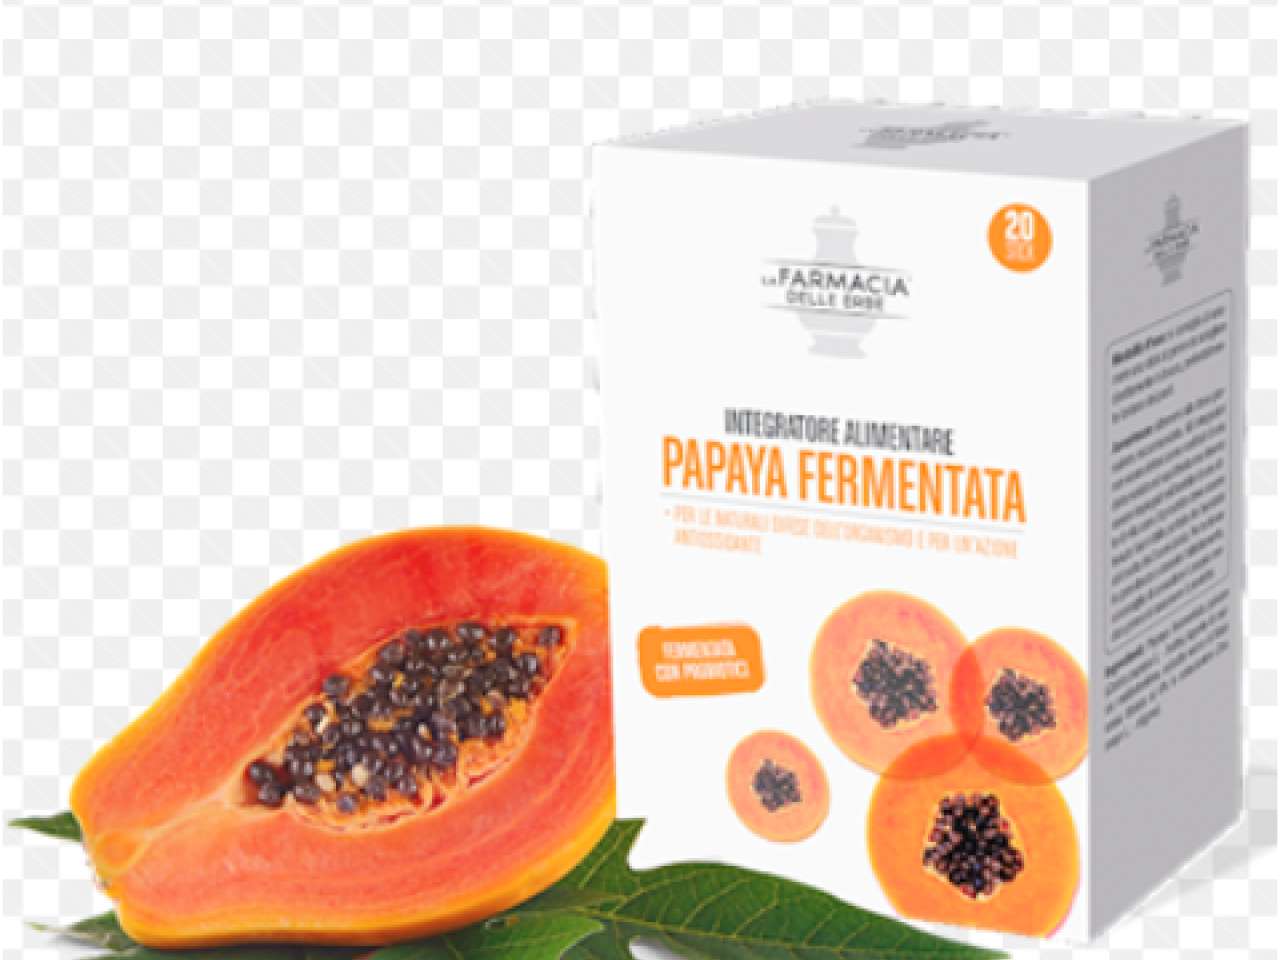 La Farmacia delle Erbe Fermented Papaya was fermented with a selected mix of 3 different probiotic ferments, to which a precious prebiotic fiber was added